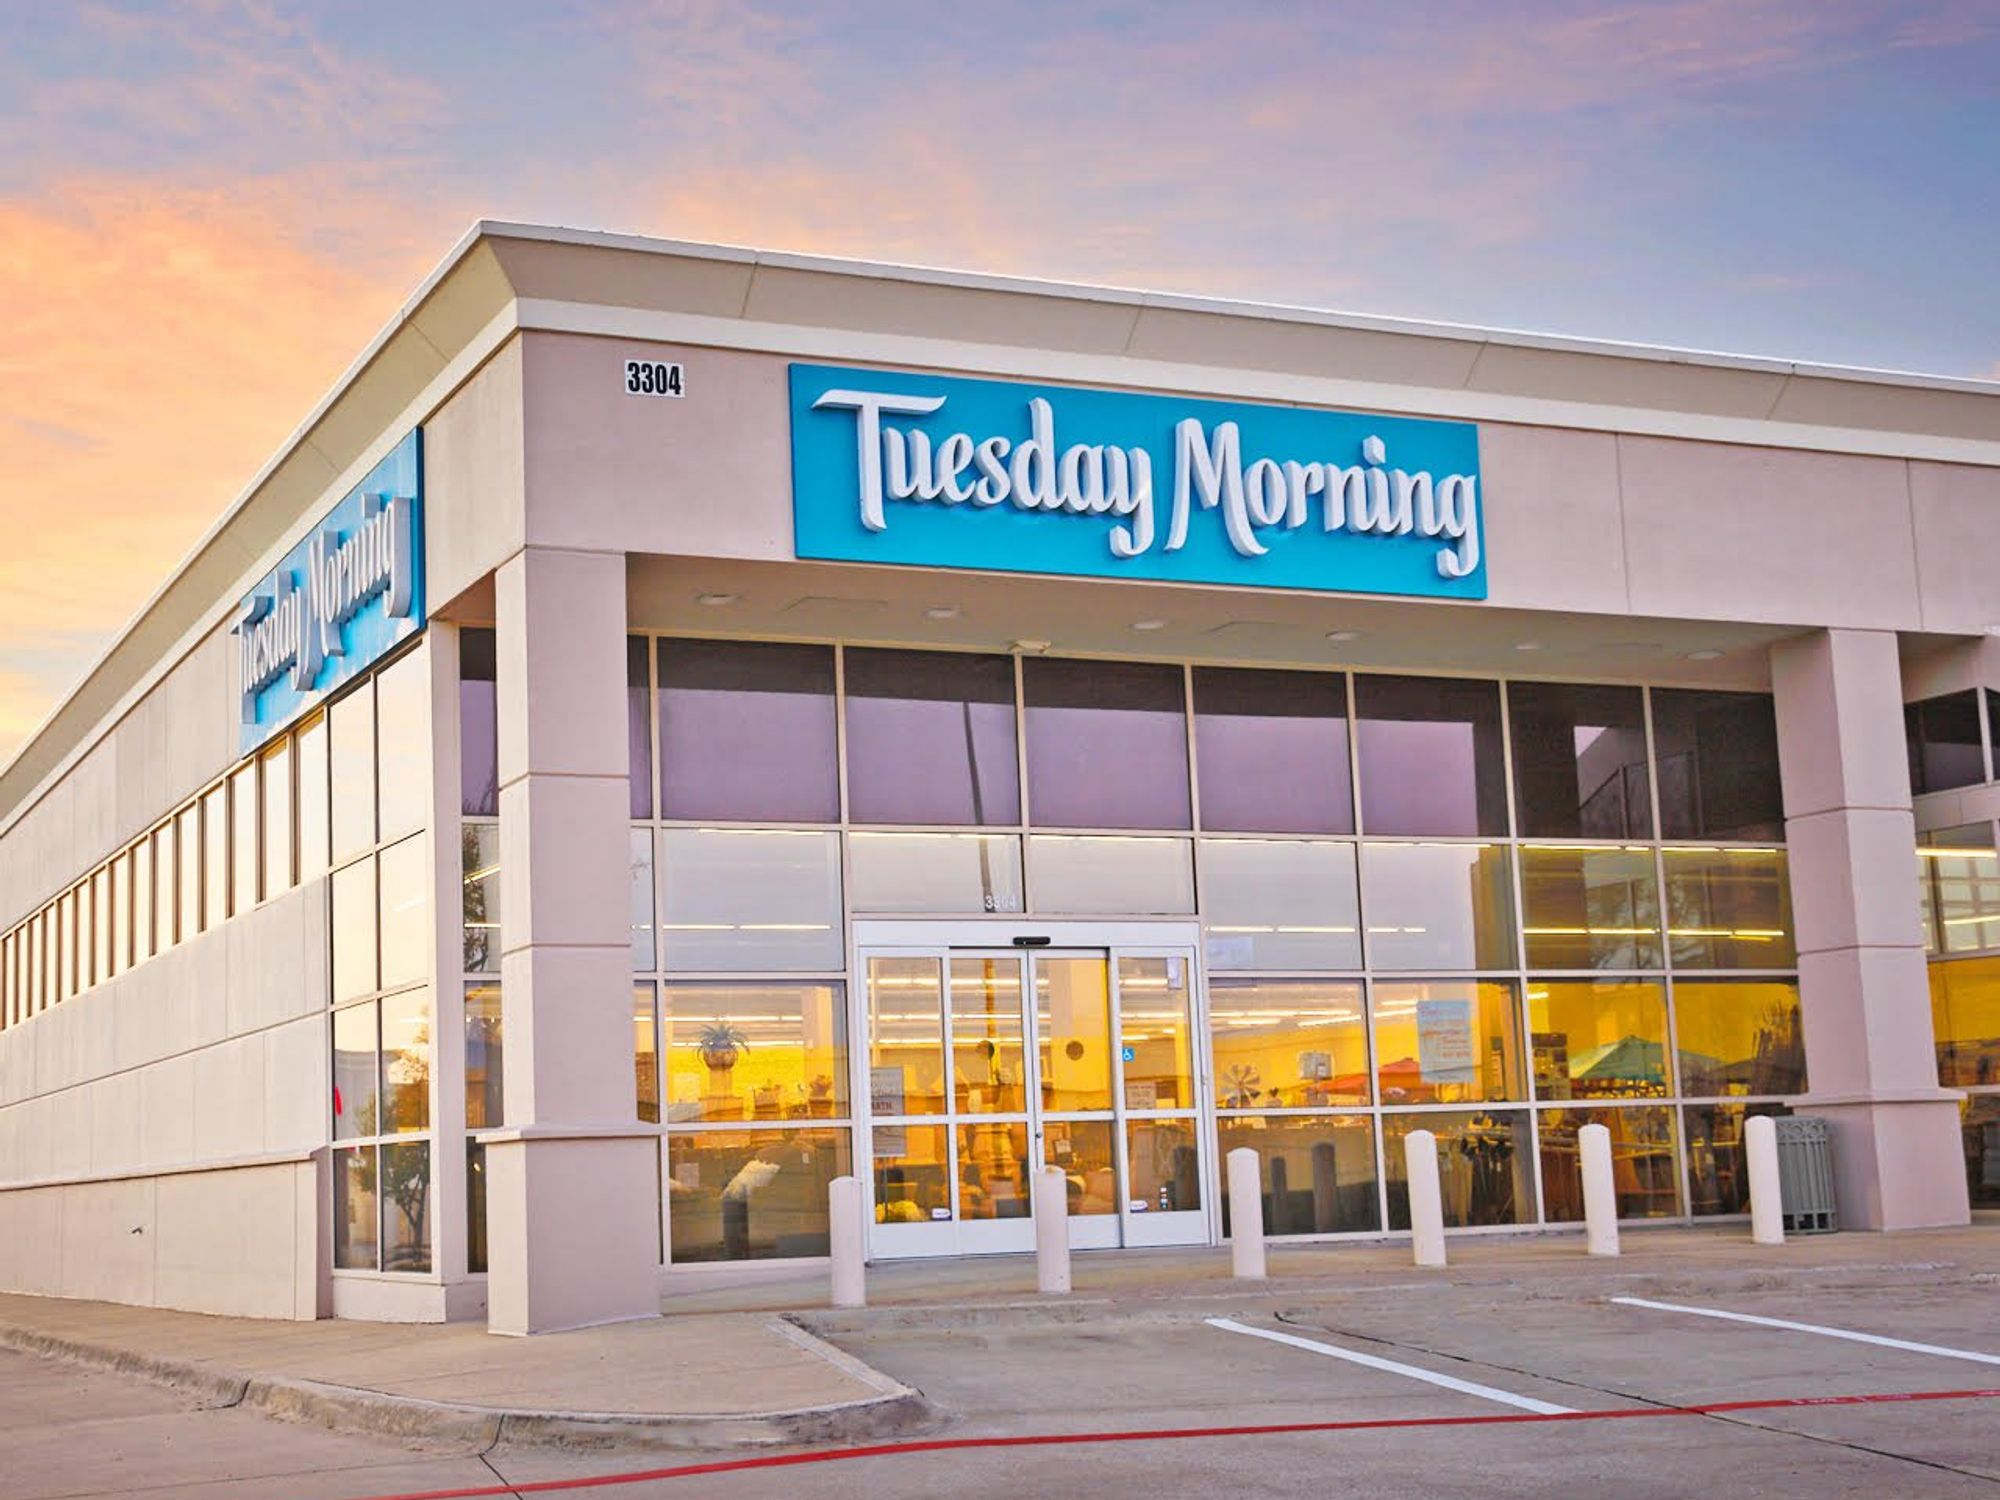 Tuesday Morning is closing all stores